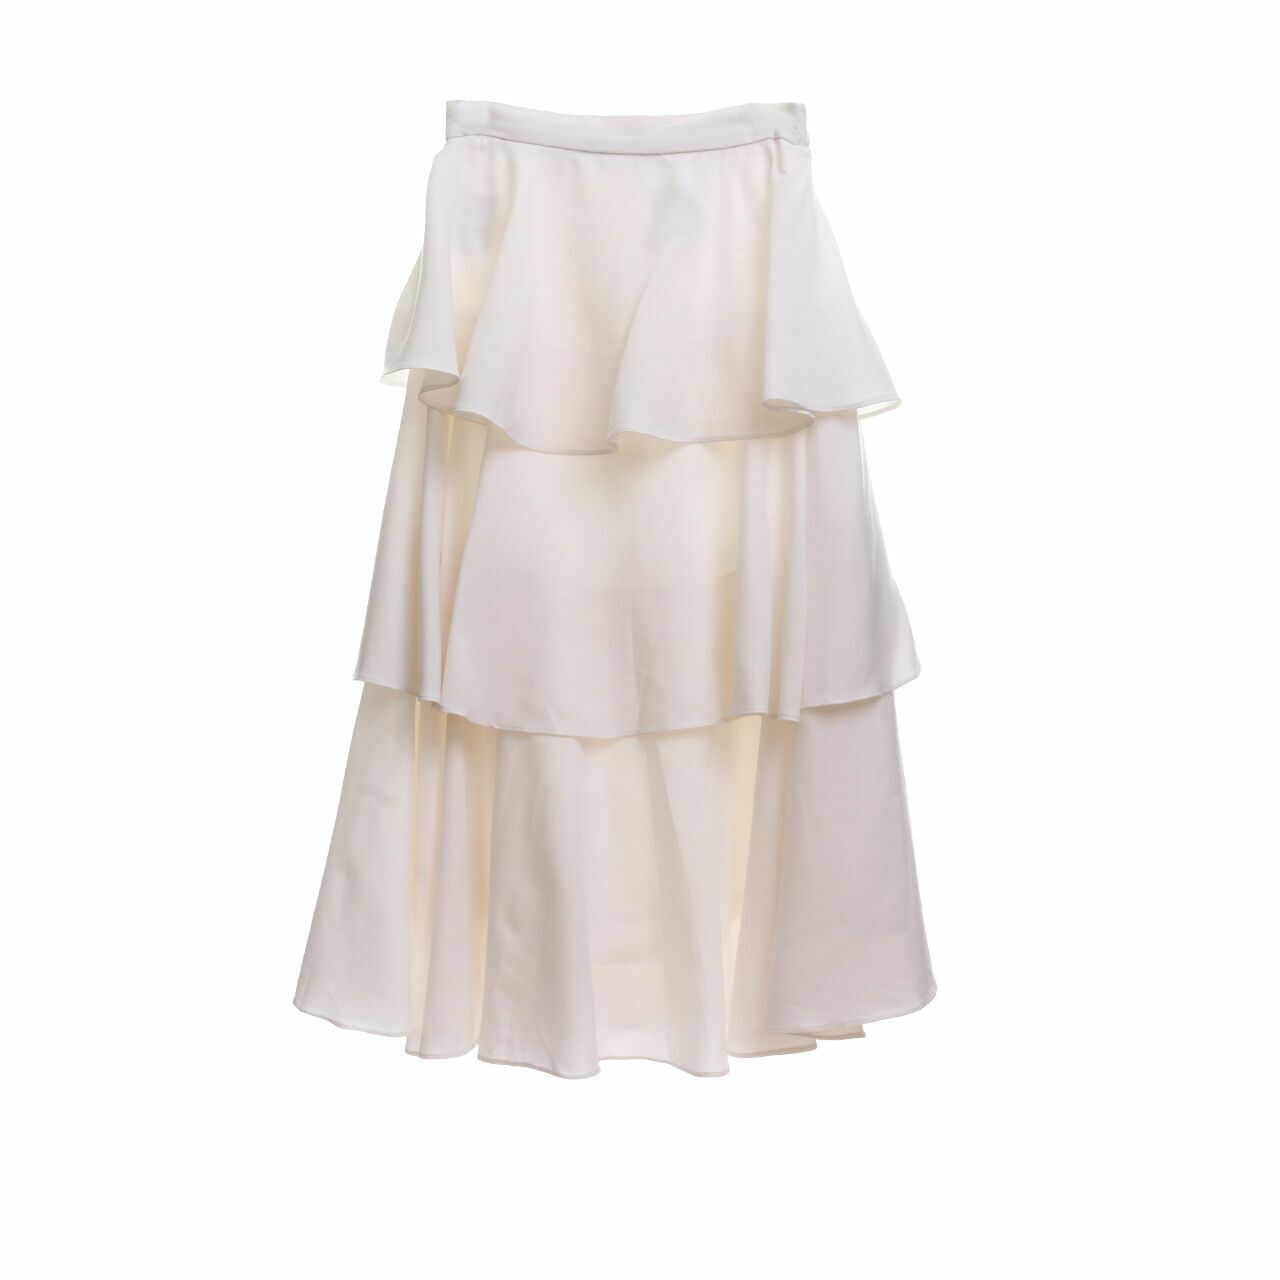 M by Mischa For anazsiantar White Maxi Skirt